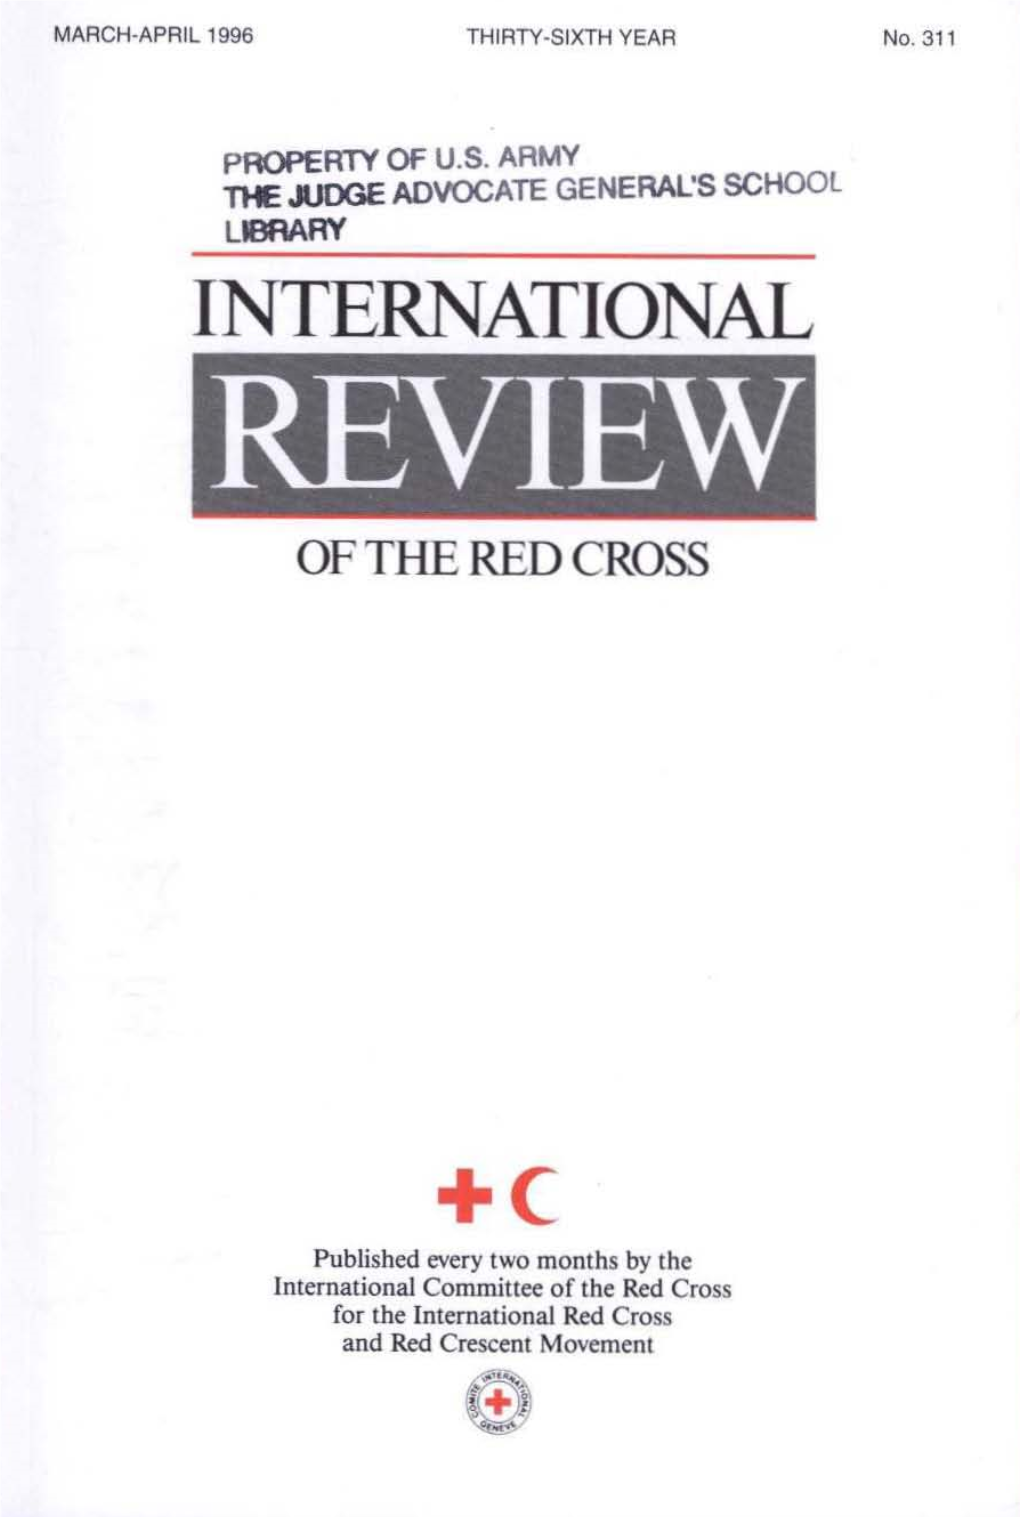 International Review of the Red Cross, March-April 1996, Thirty